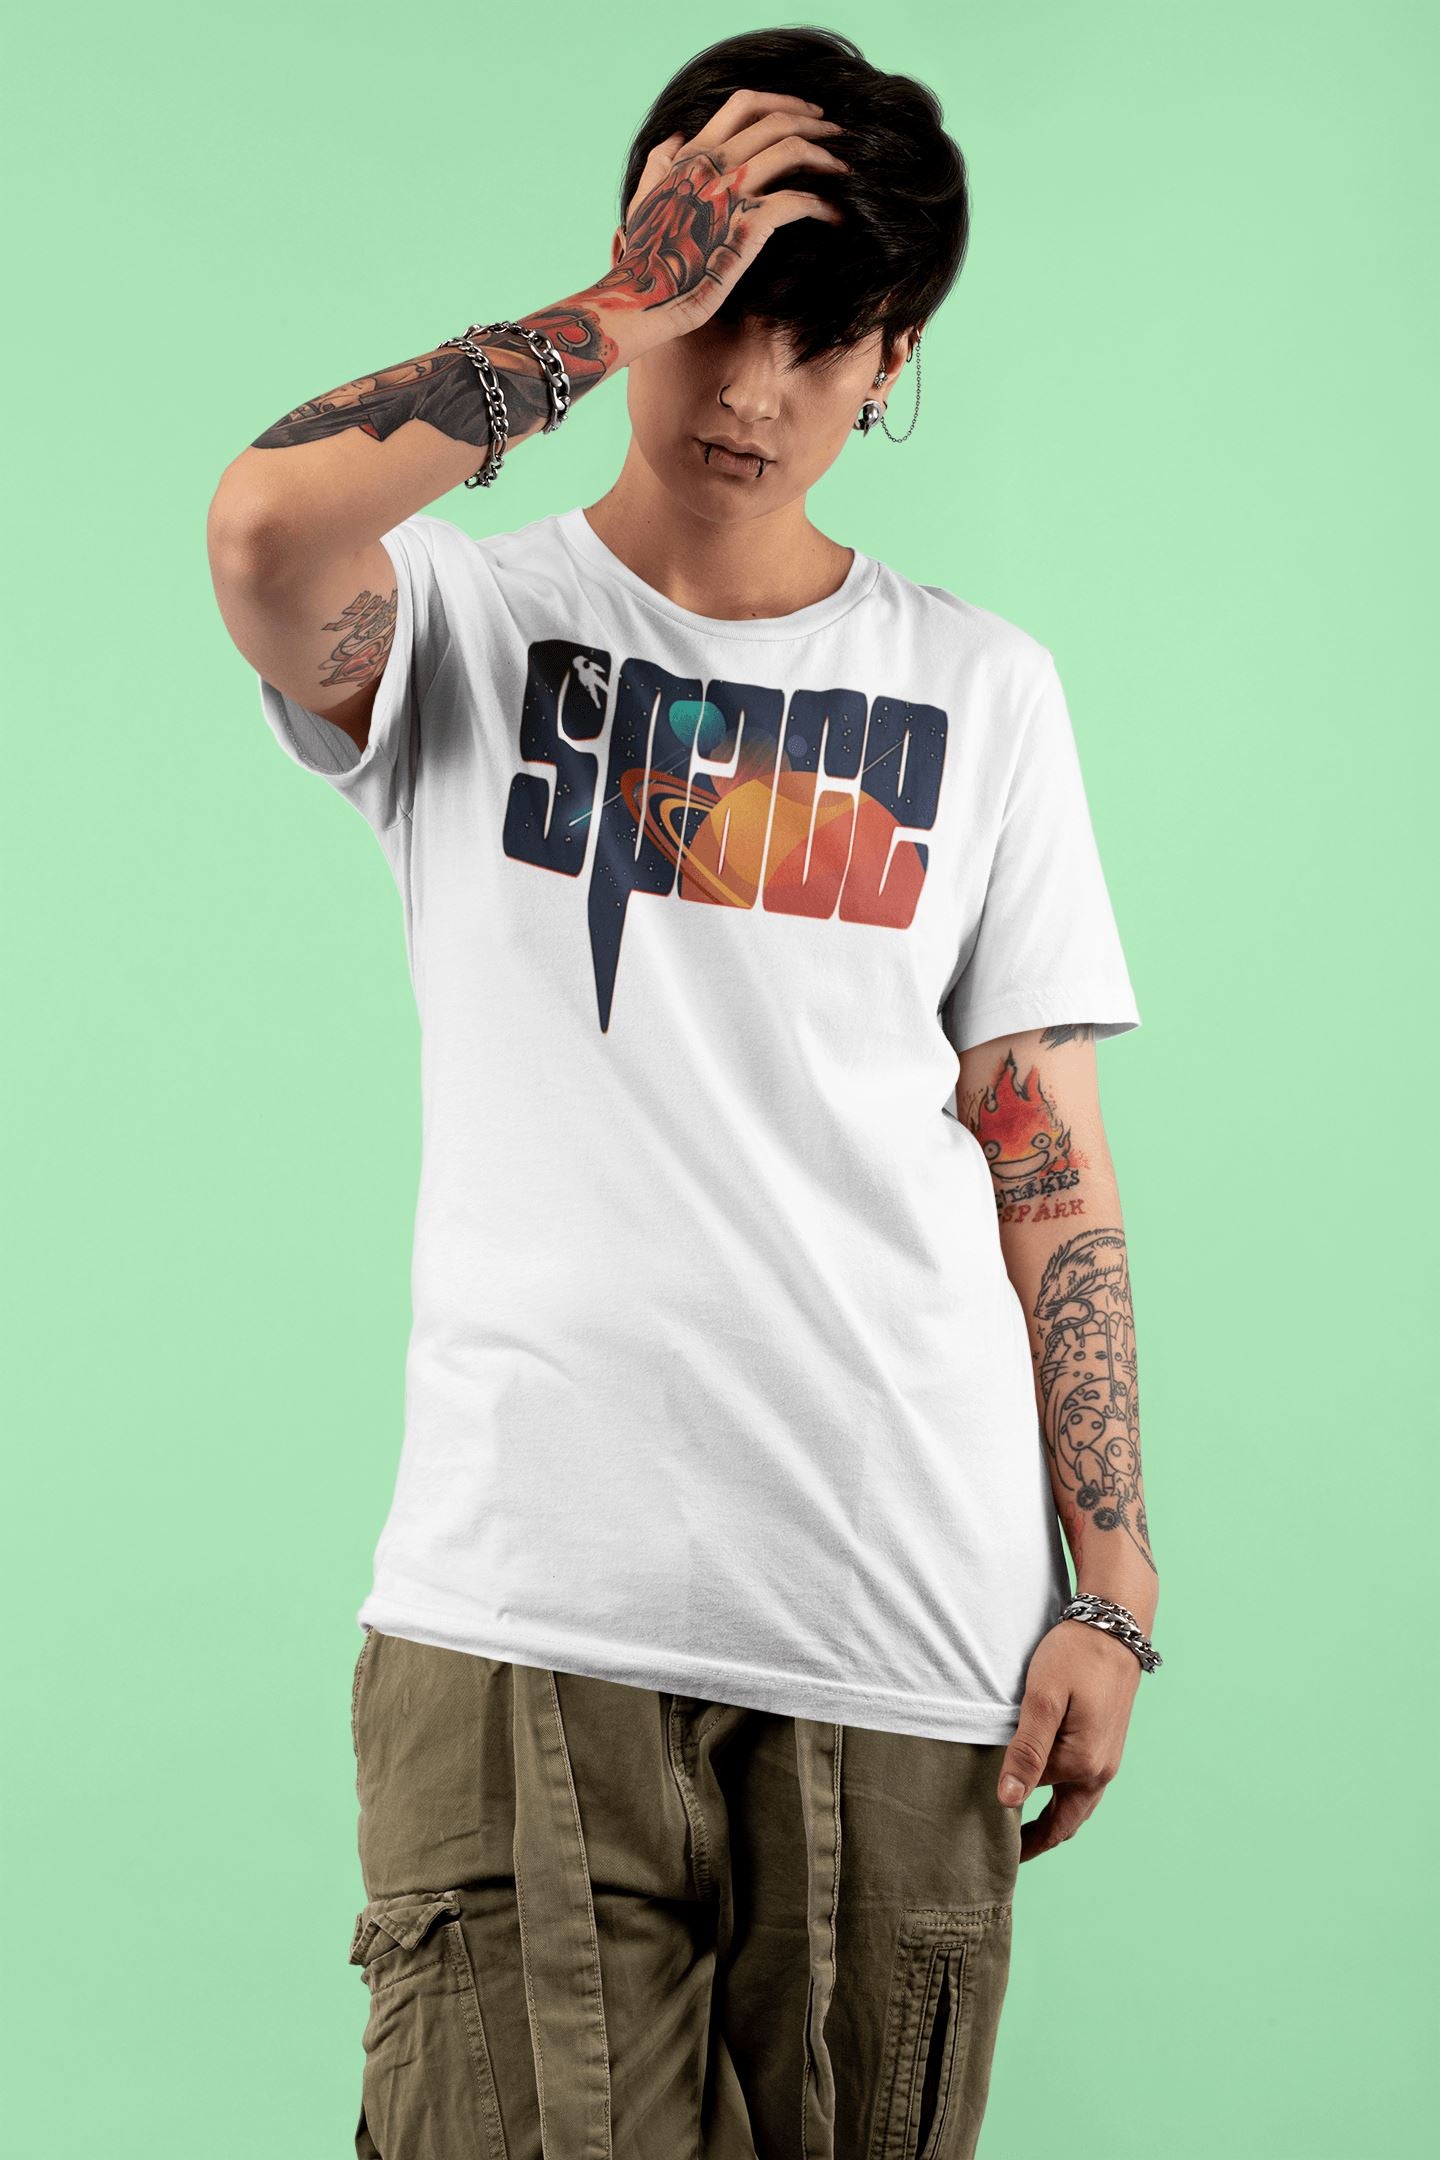 Space Window of the Unknown Supreme White T Shirt for Men and Women - Catch My Drift India  clothing, galaxy, made in india, nasa, shirt, space, t shirt, trending, tshirt, white